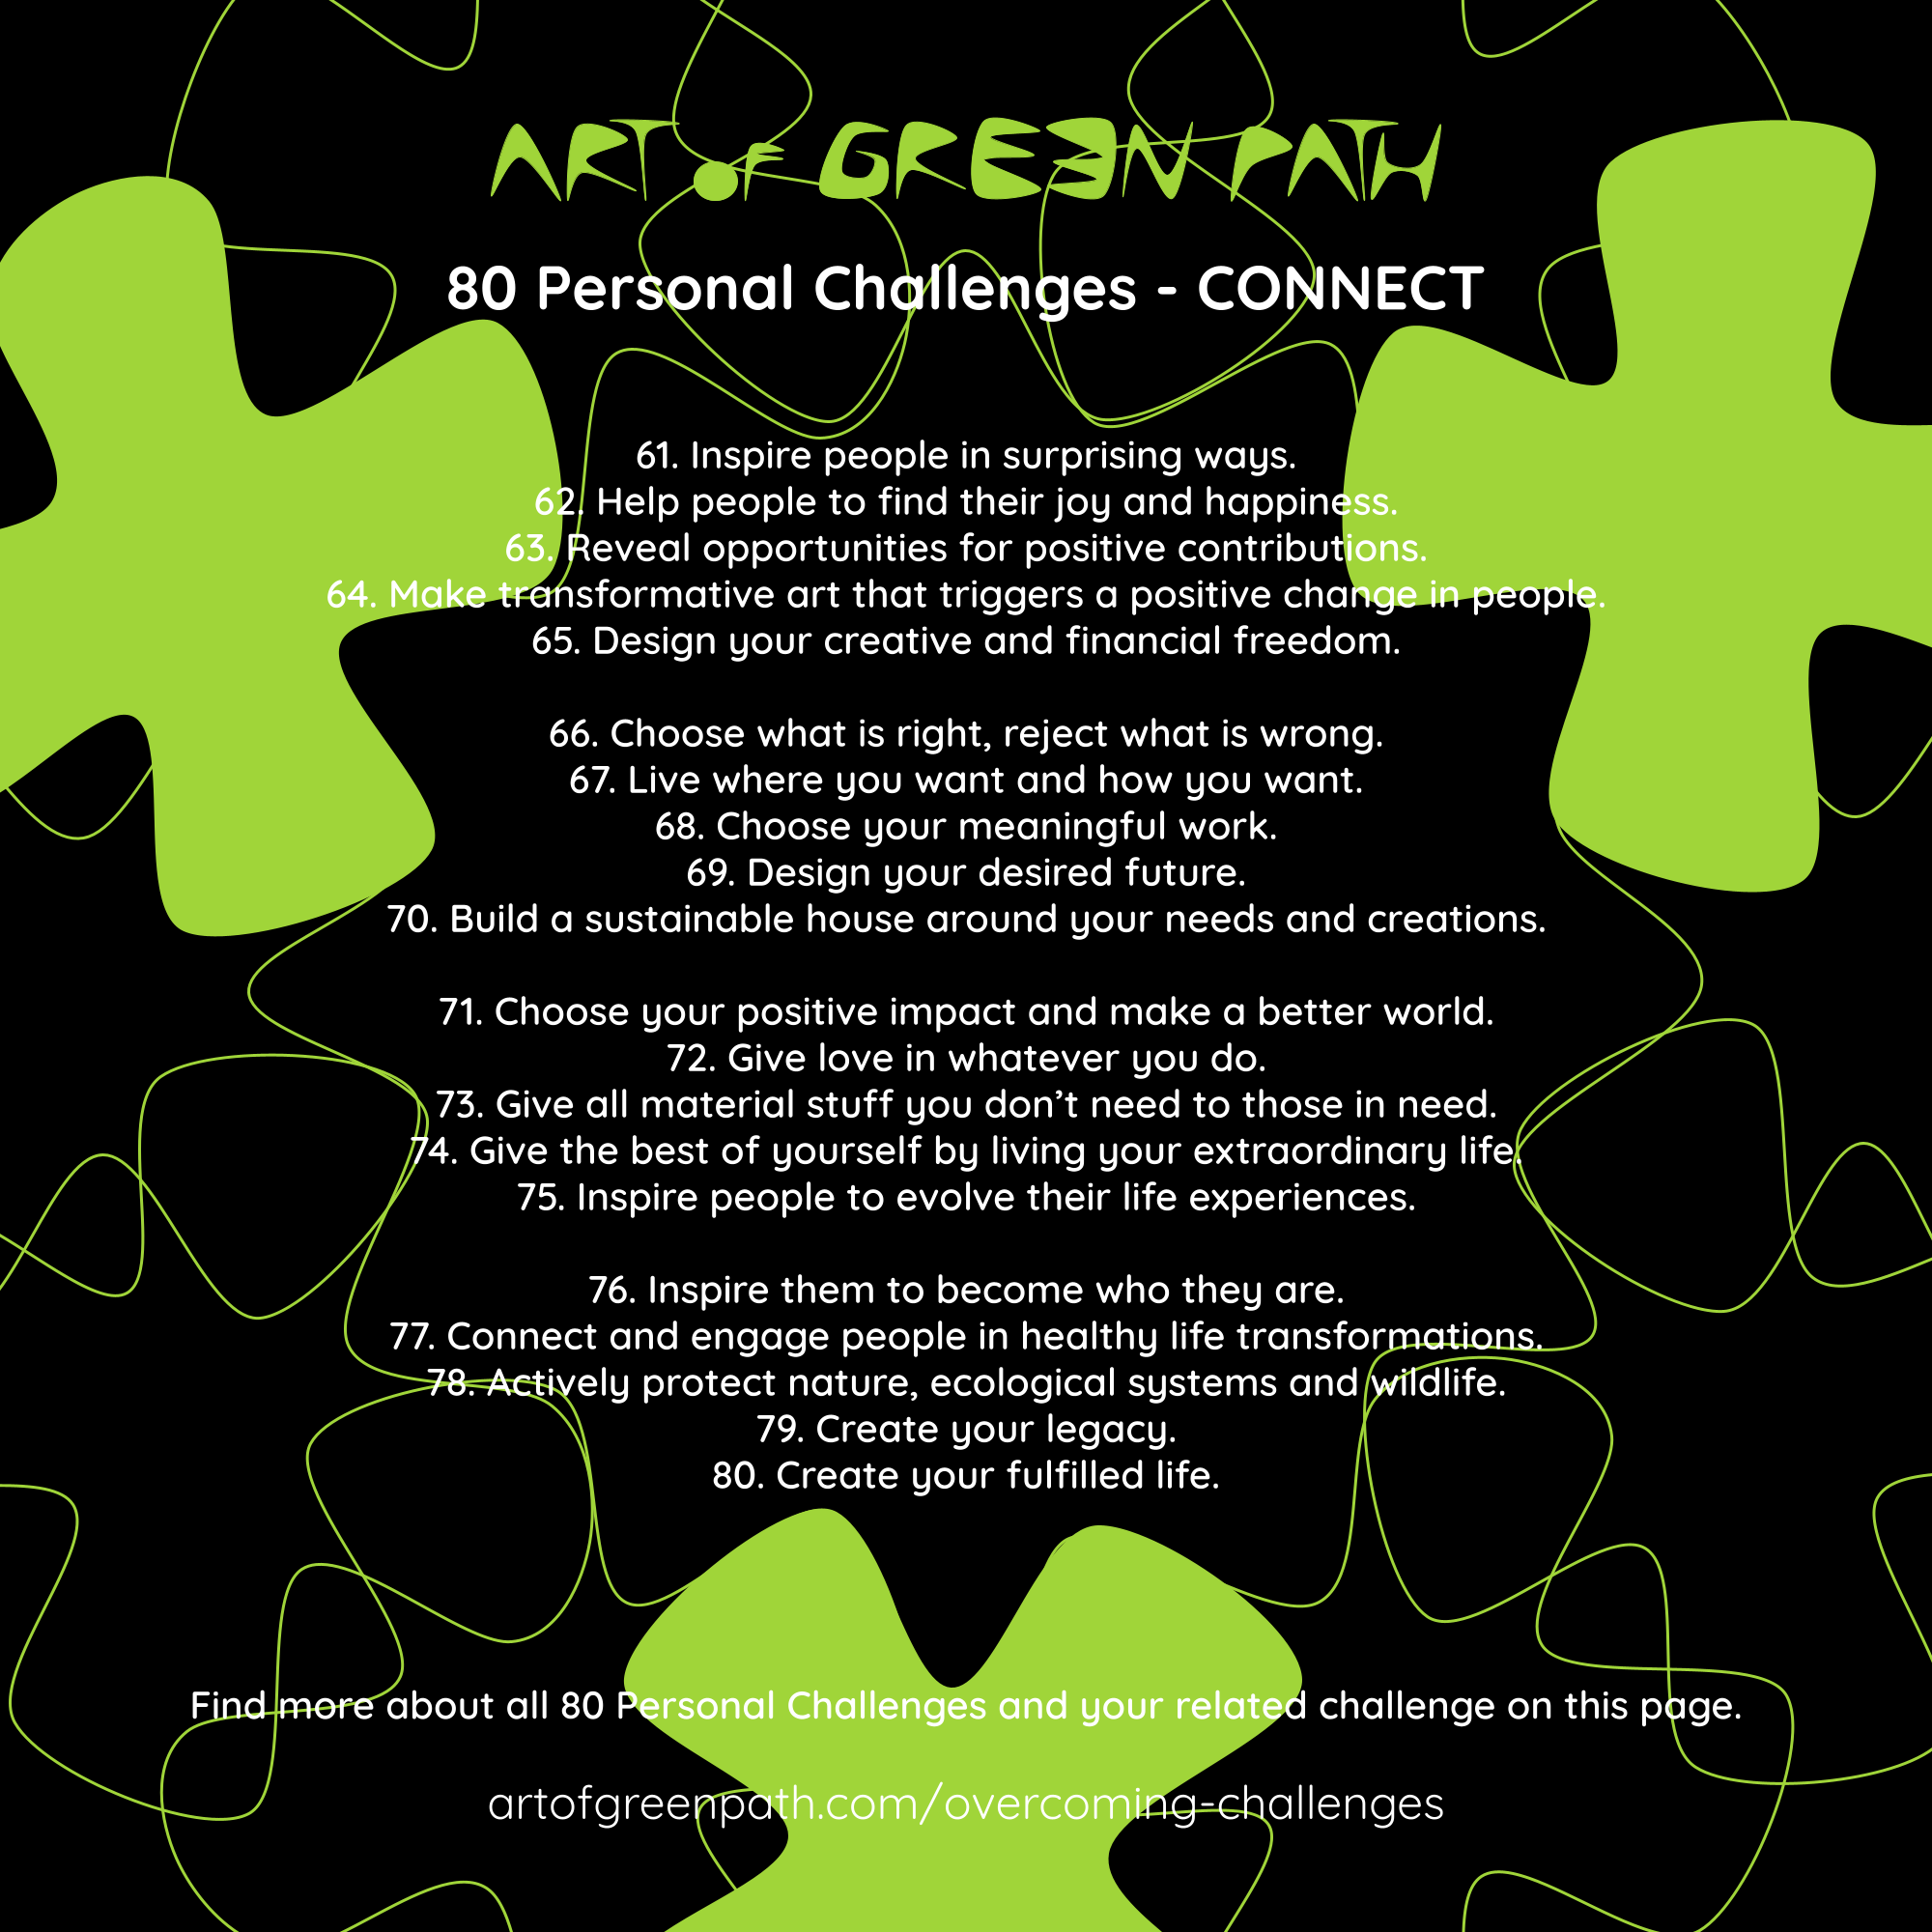 80 Personal Challenges - CONNECT by Art Of Green Path